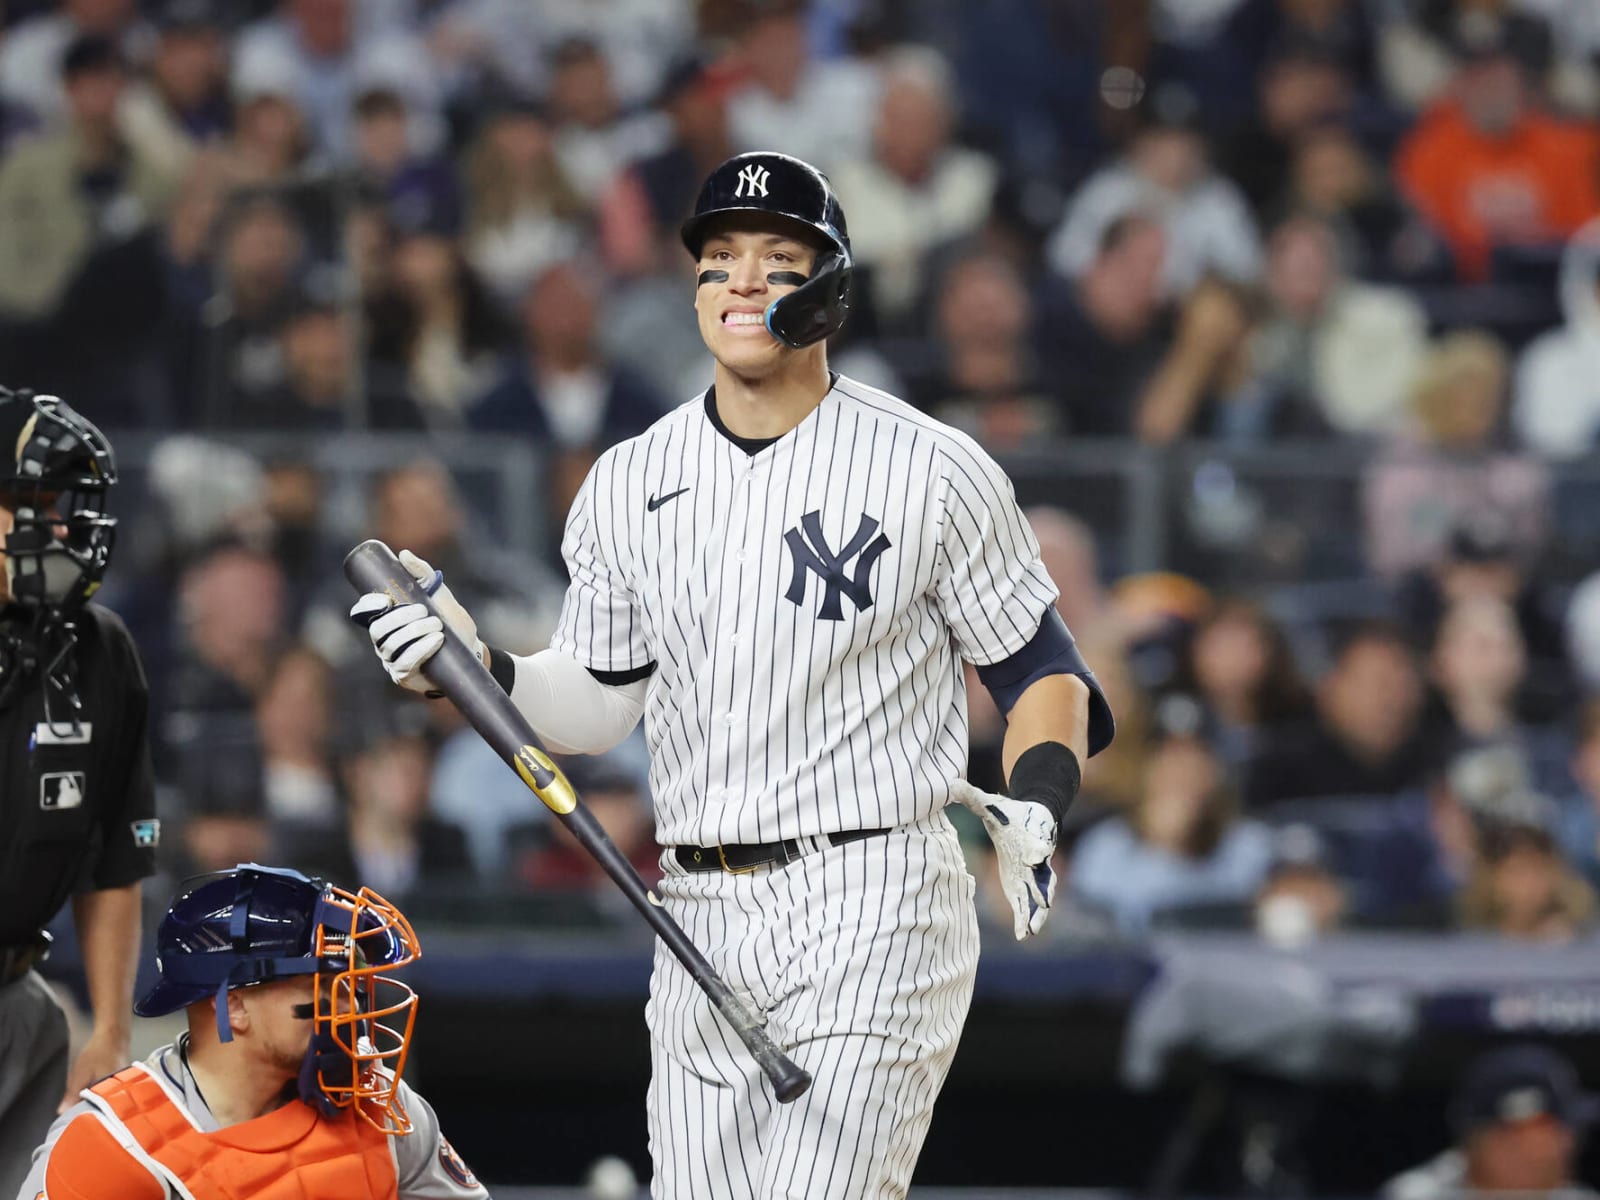 Why Aaron Judge may hear complaints about food in 2023